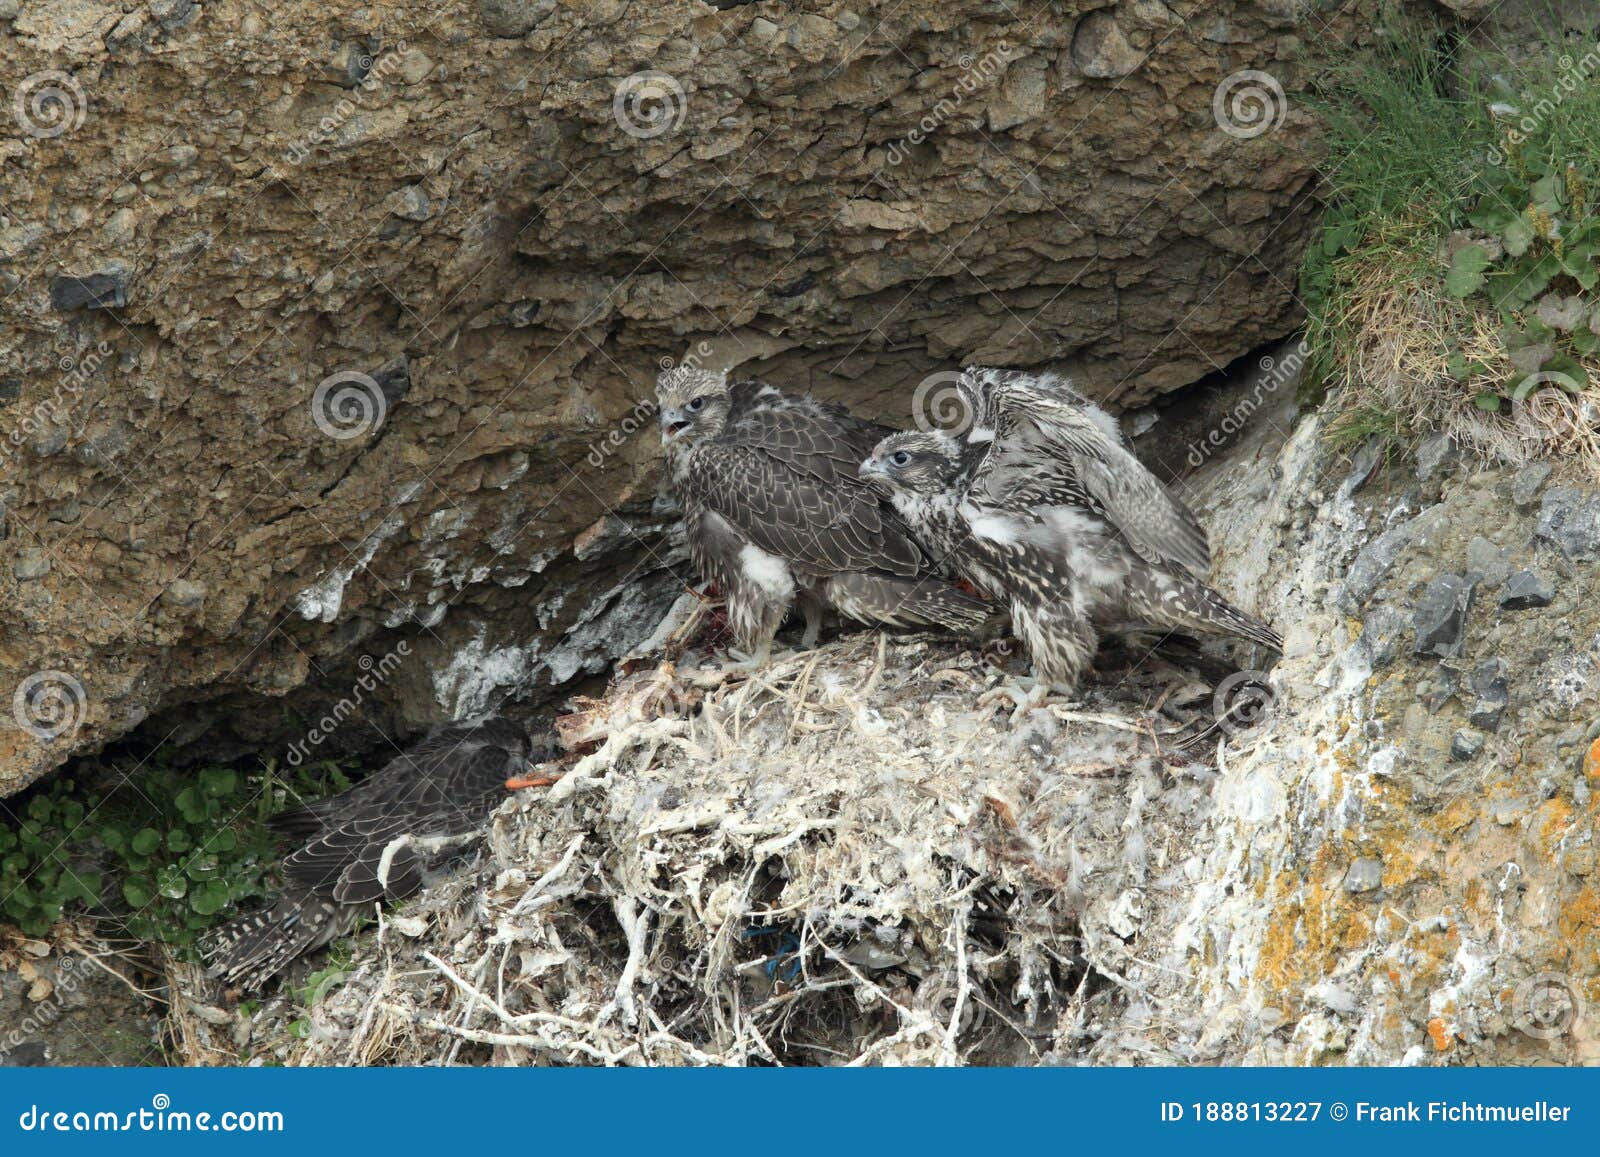 Young Gyrfalcon (Falco Rusticolus) in the Nest Iceland Stock Image ...